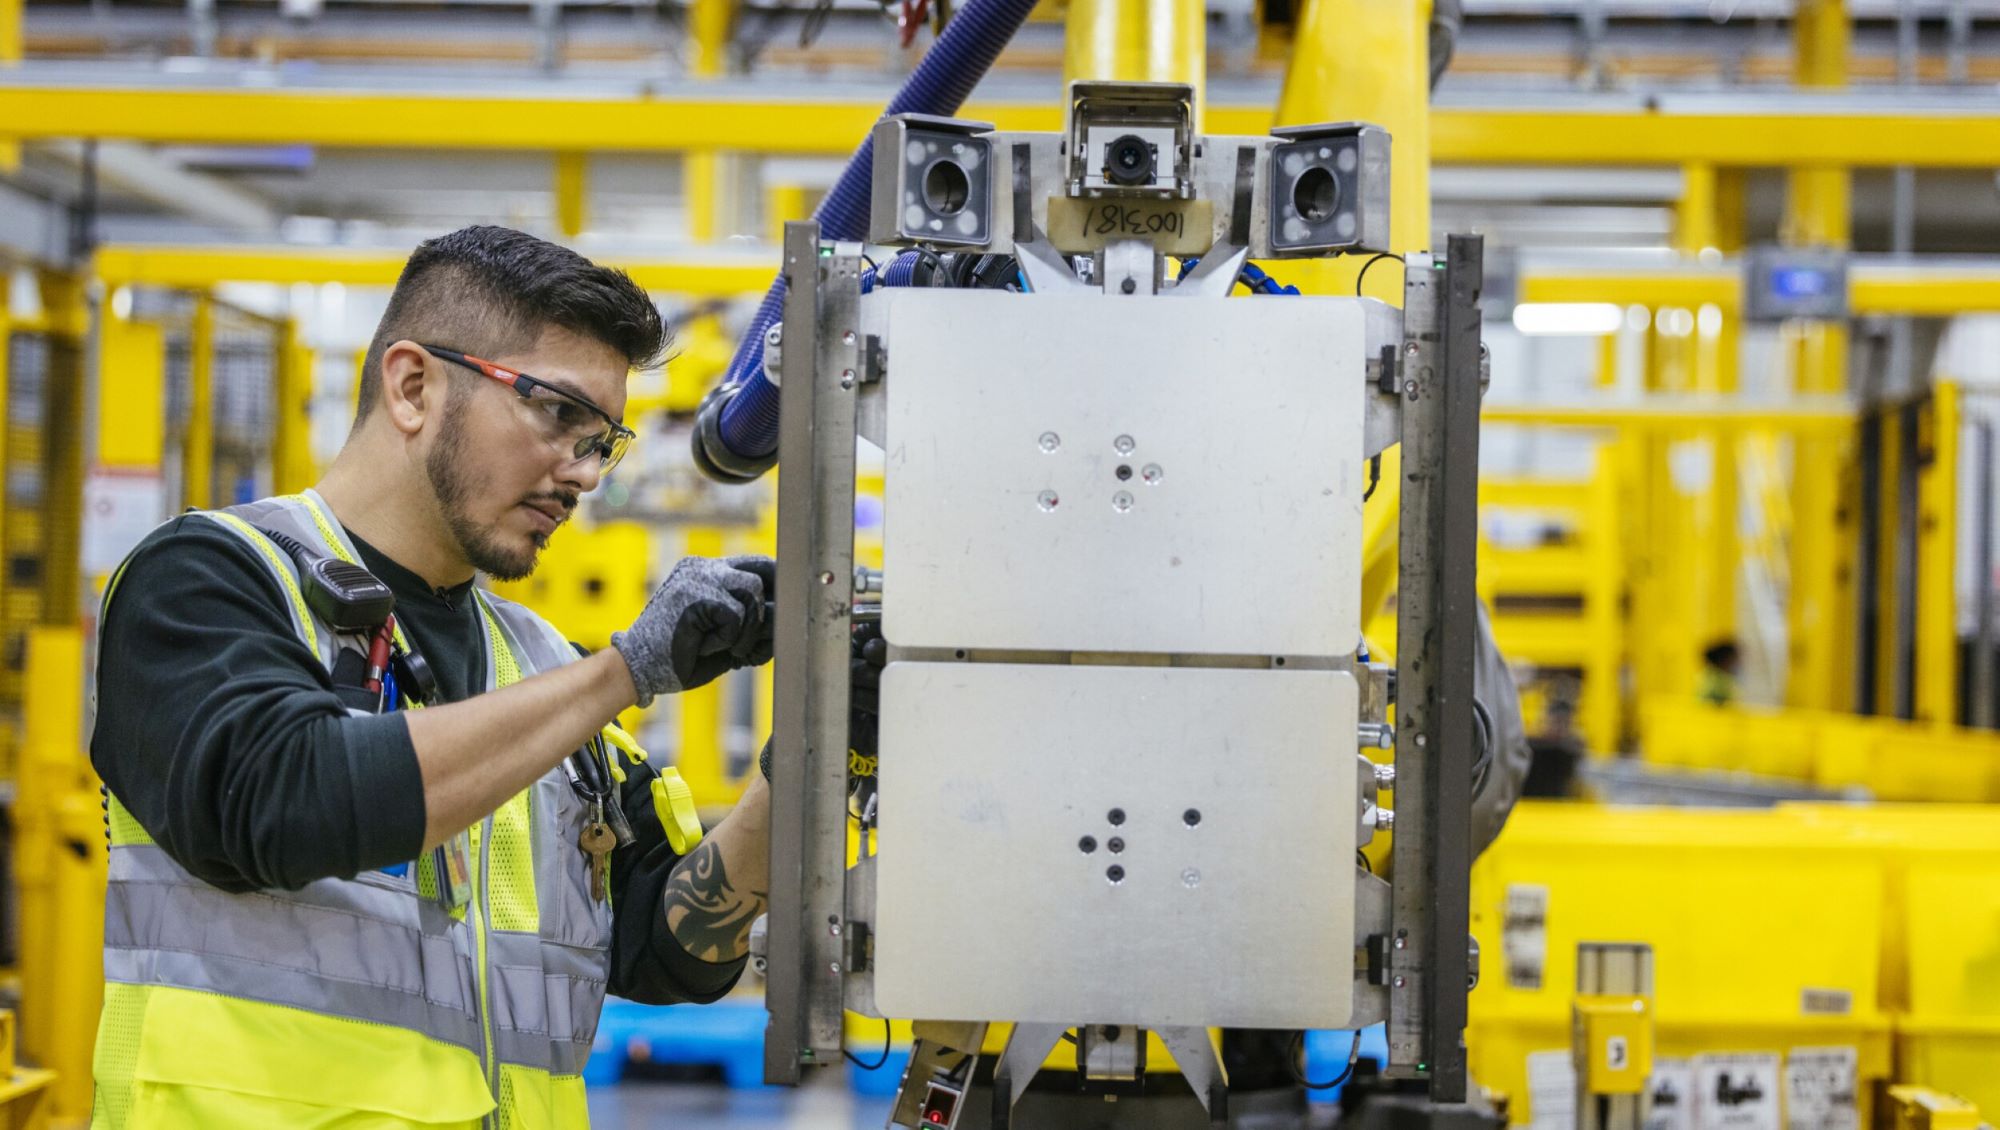 Amazon Partners With MIT To Study The Impact Of Robots On Jobs